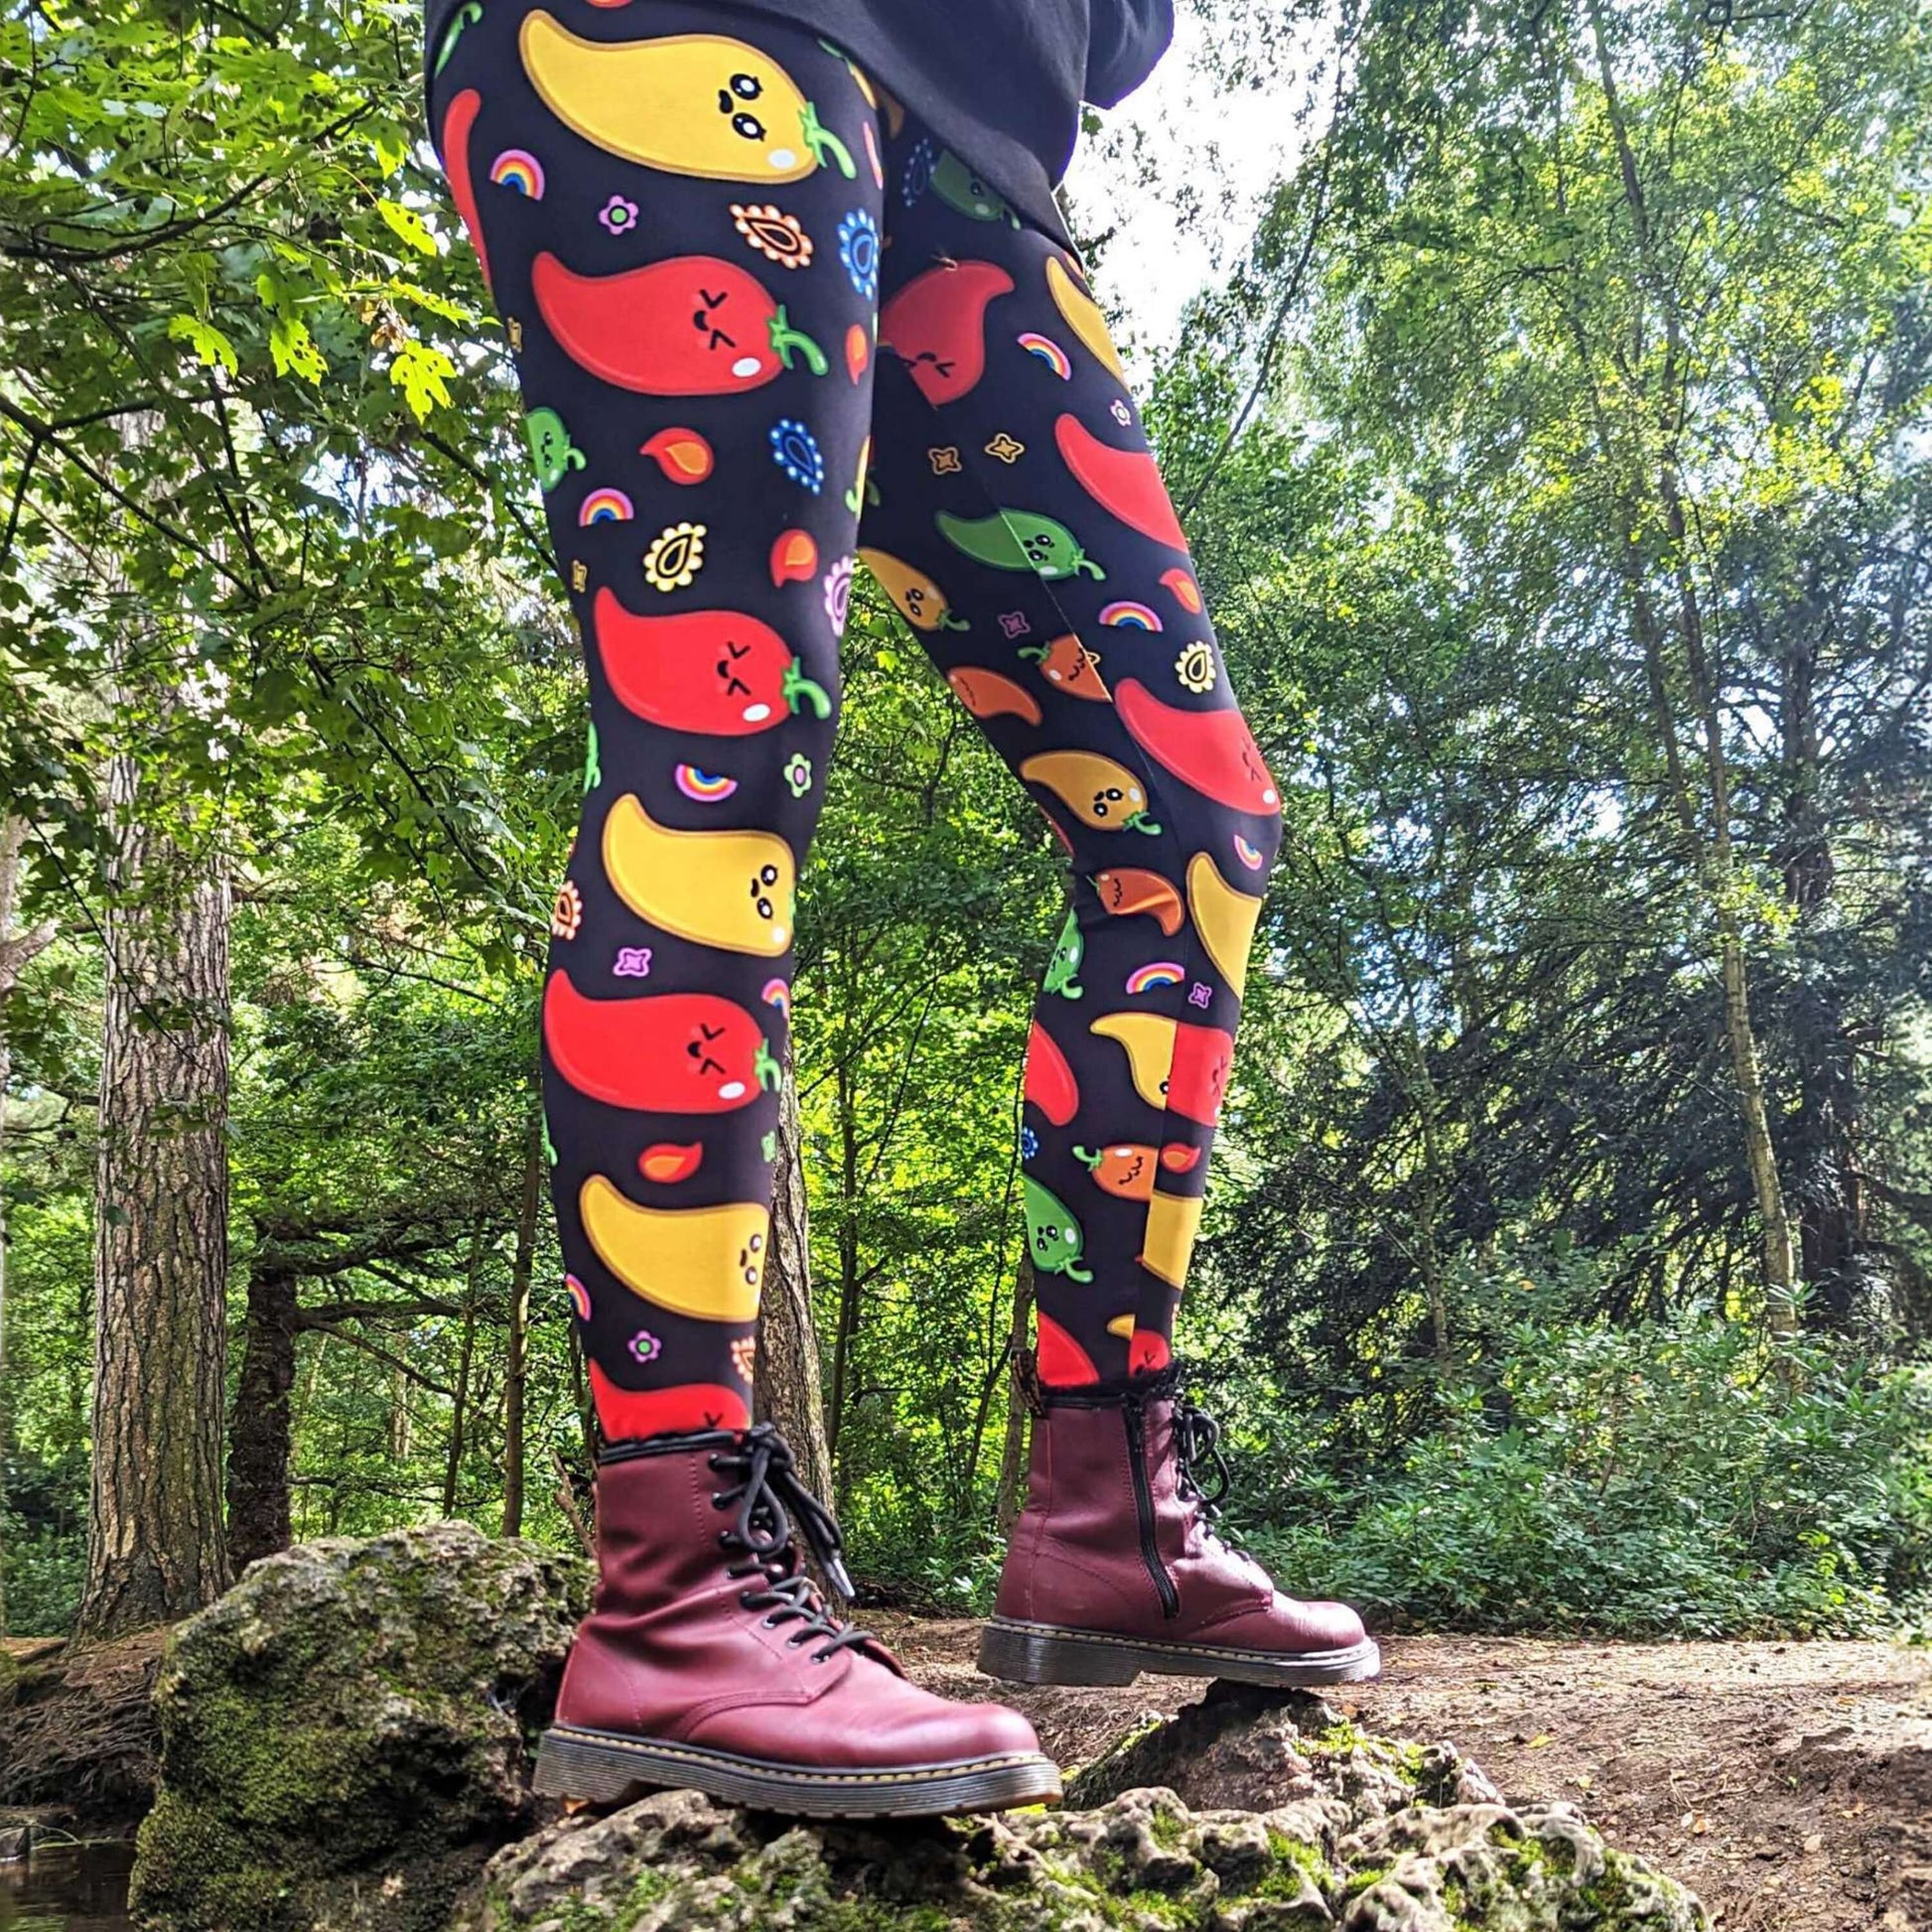 A person standing on a rock wearing Black leggings with red, green, orange and yellow chilli peppers with cute faces on and various cute doodles around them. The hand drawn design is raising awareness for neurodiversity.